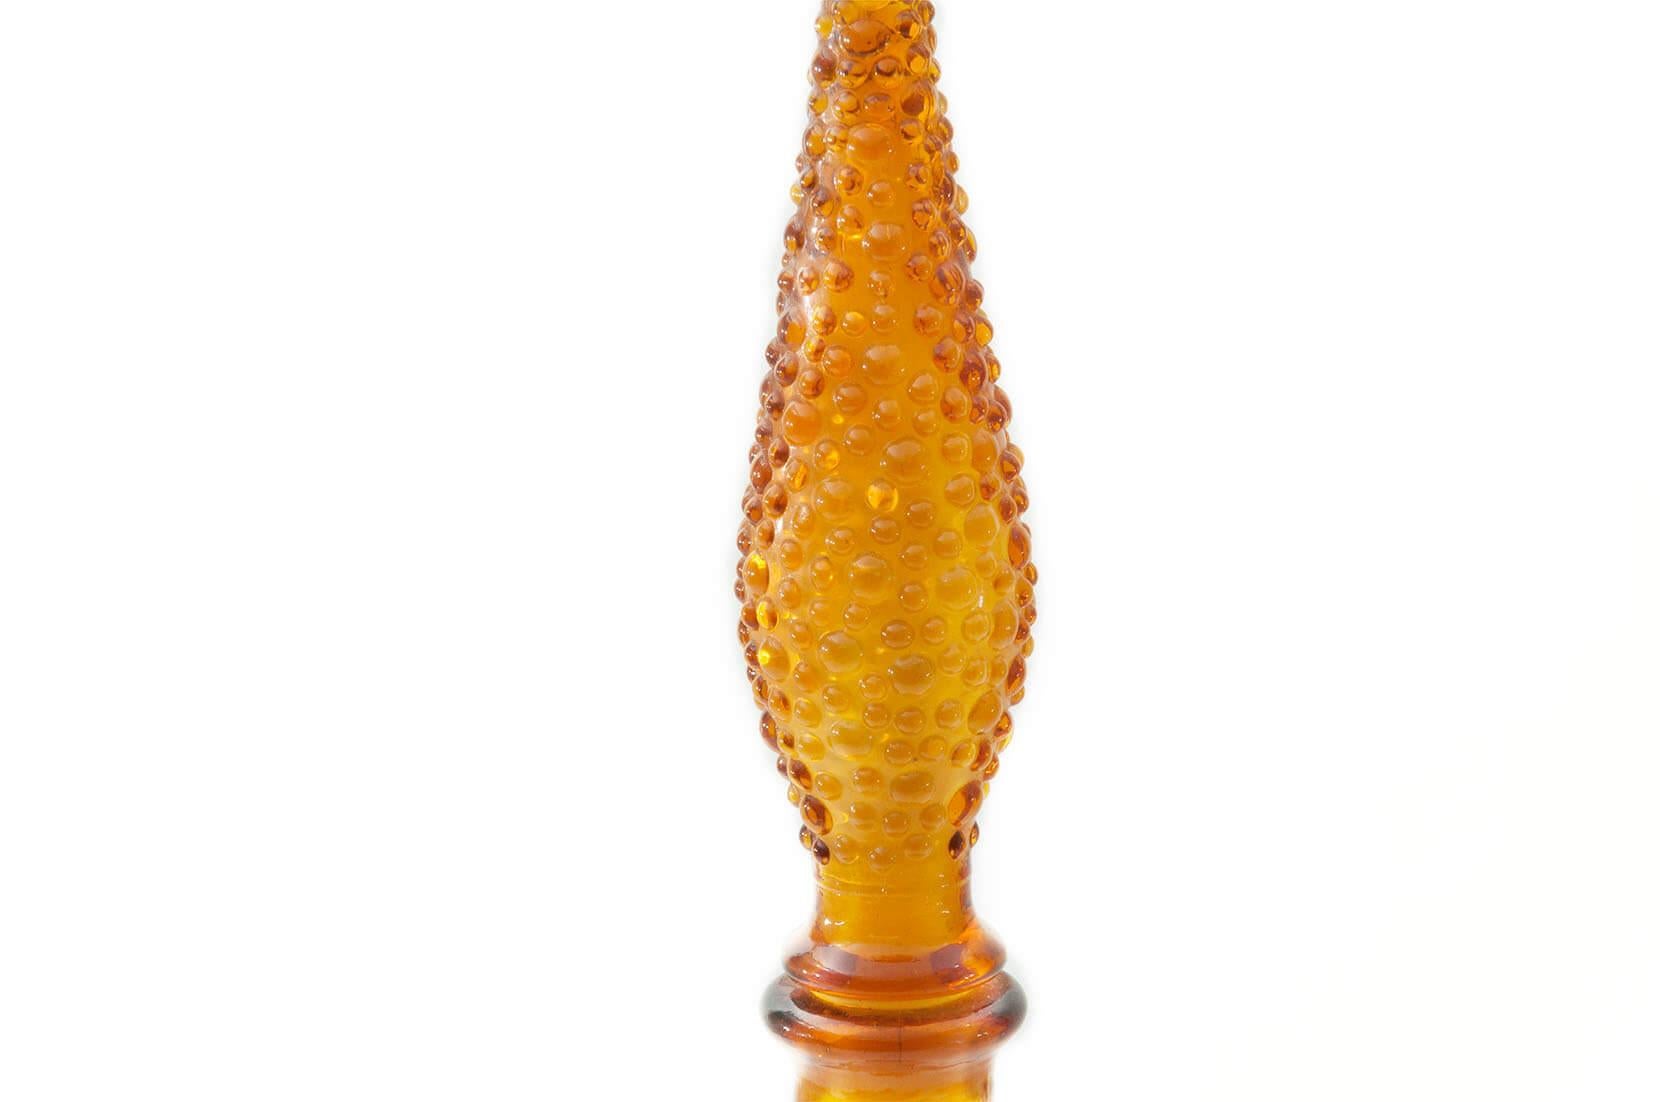 Mid-Century Modern Glass Vase by Empoli, Manufactured in Murano, Italy 1960, in an Orange Color For Sale